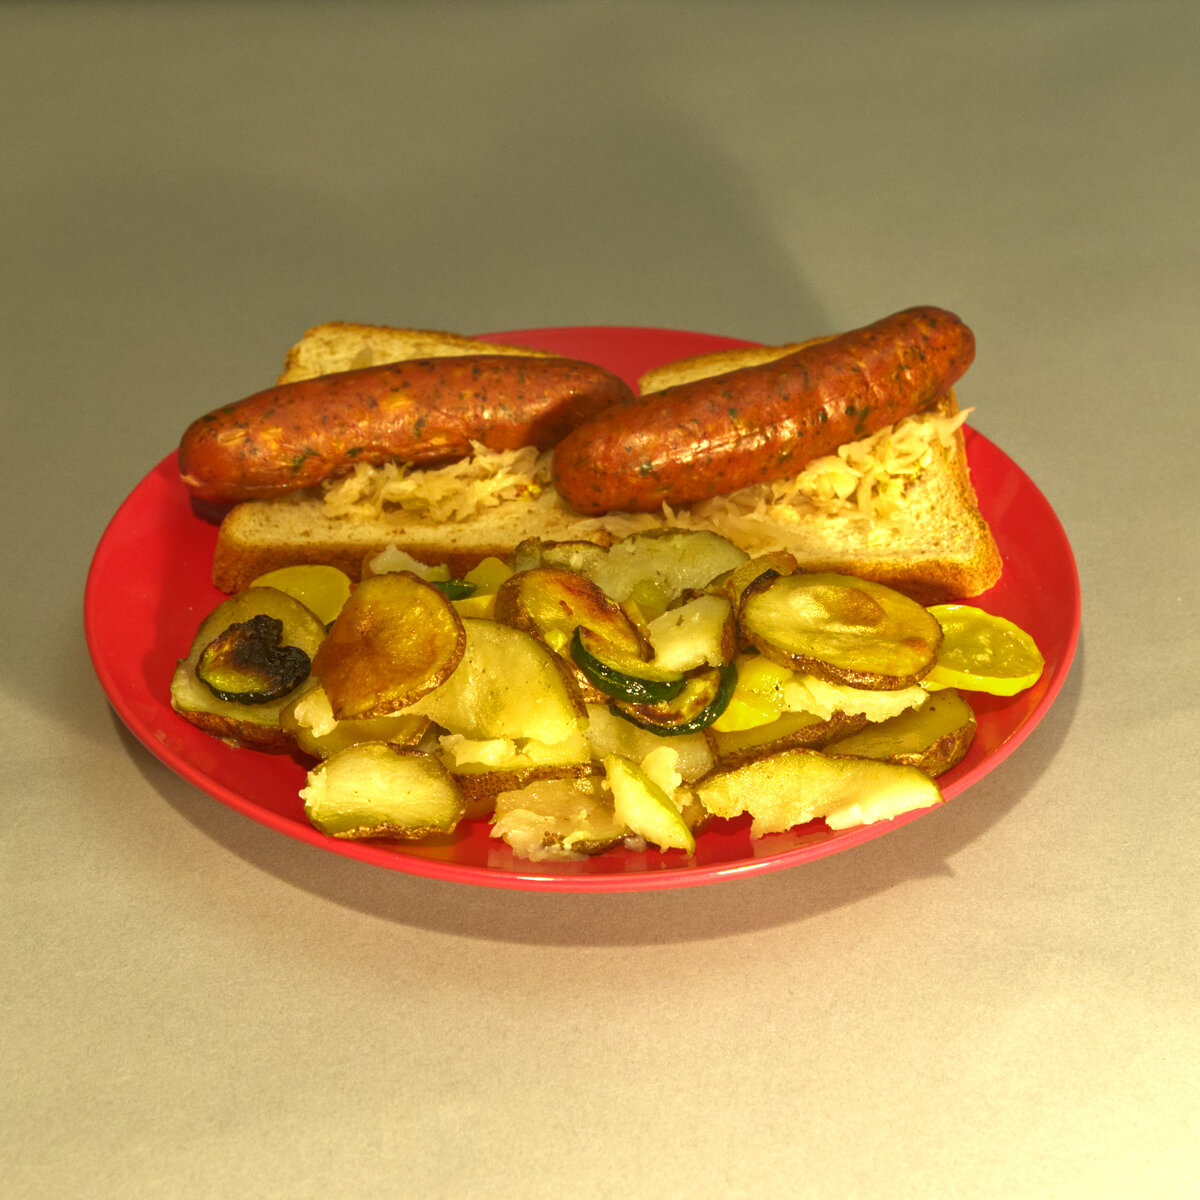 Italian Sausage Sandwiches and Deep Fried Potatoes and Zucchini